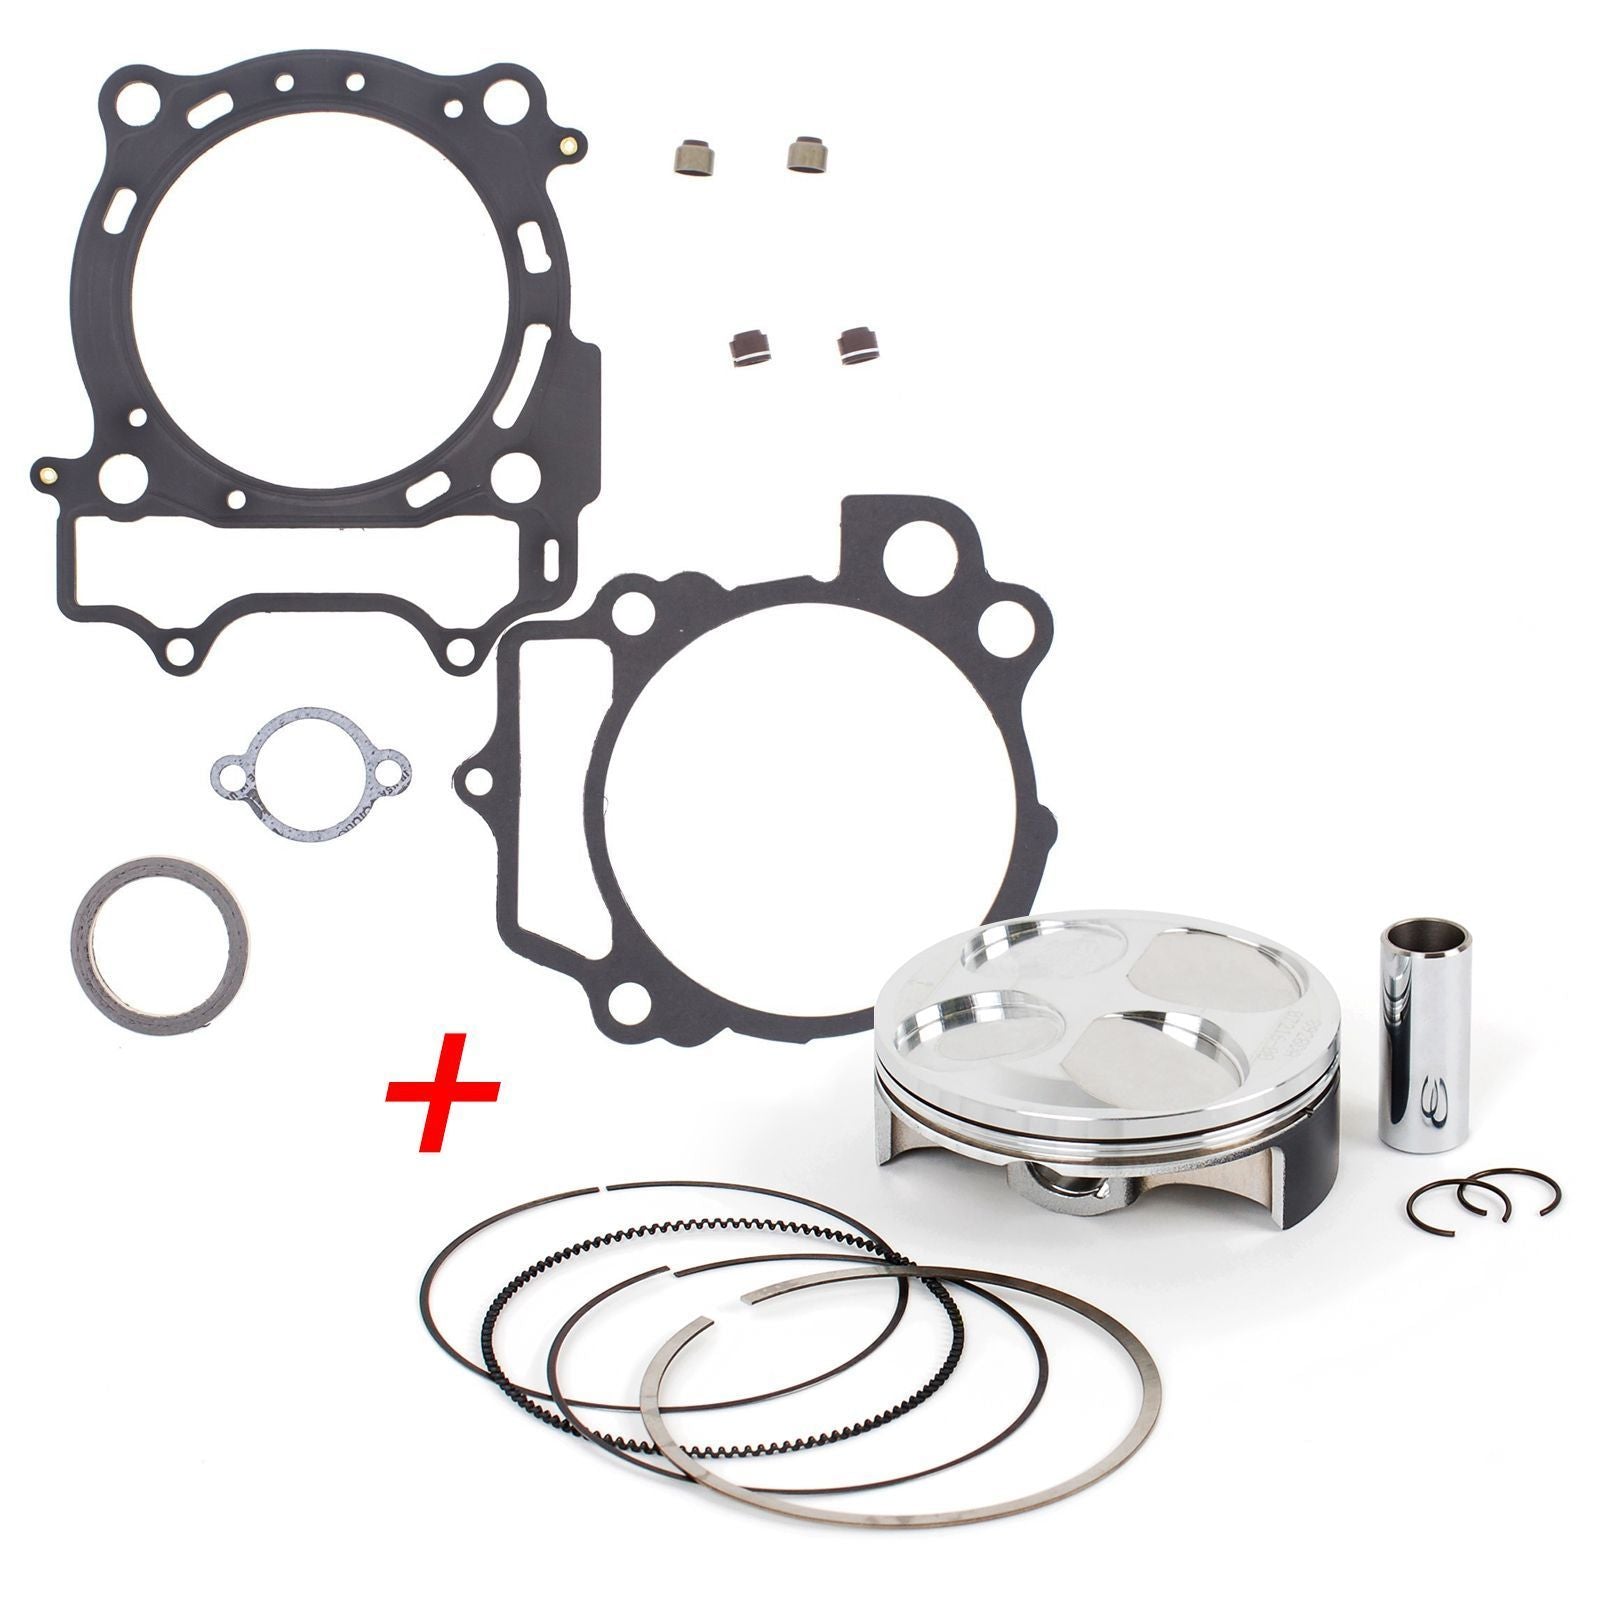 New Top End Rebuild Kit (B) For Yamaha WR250F 2001-2013 #ERTY030B